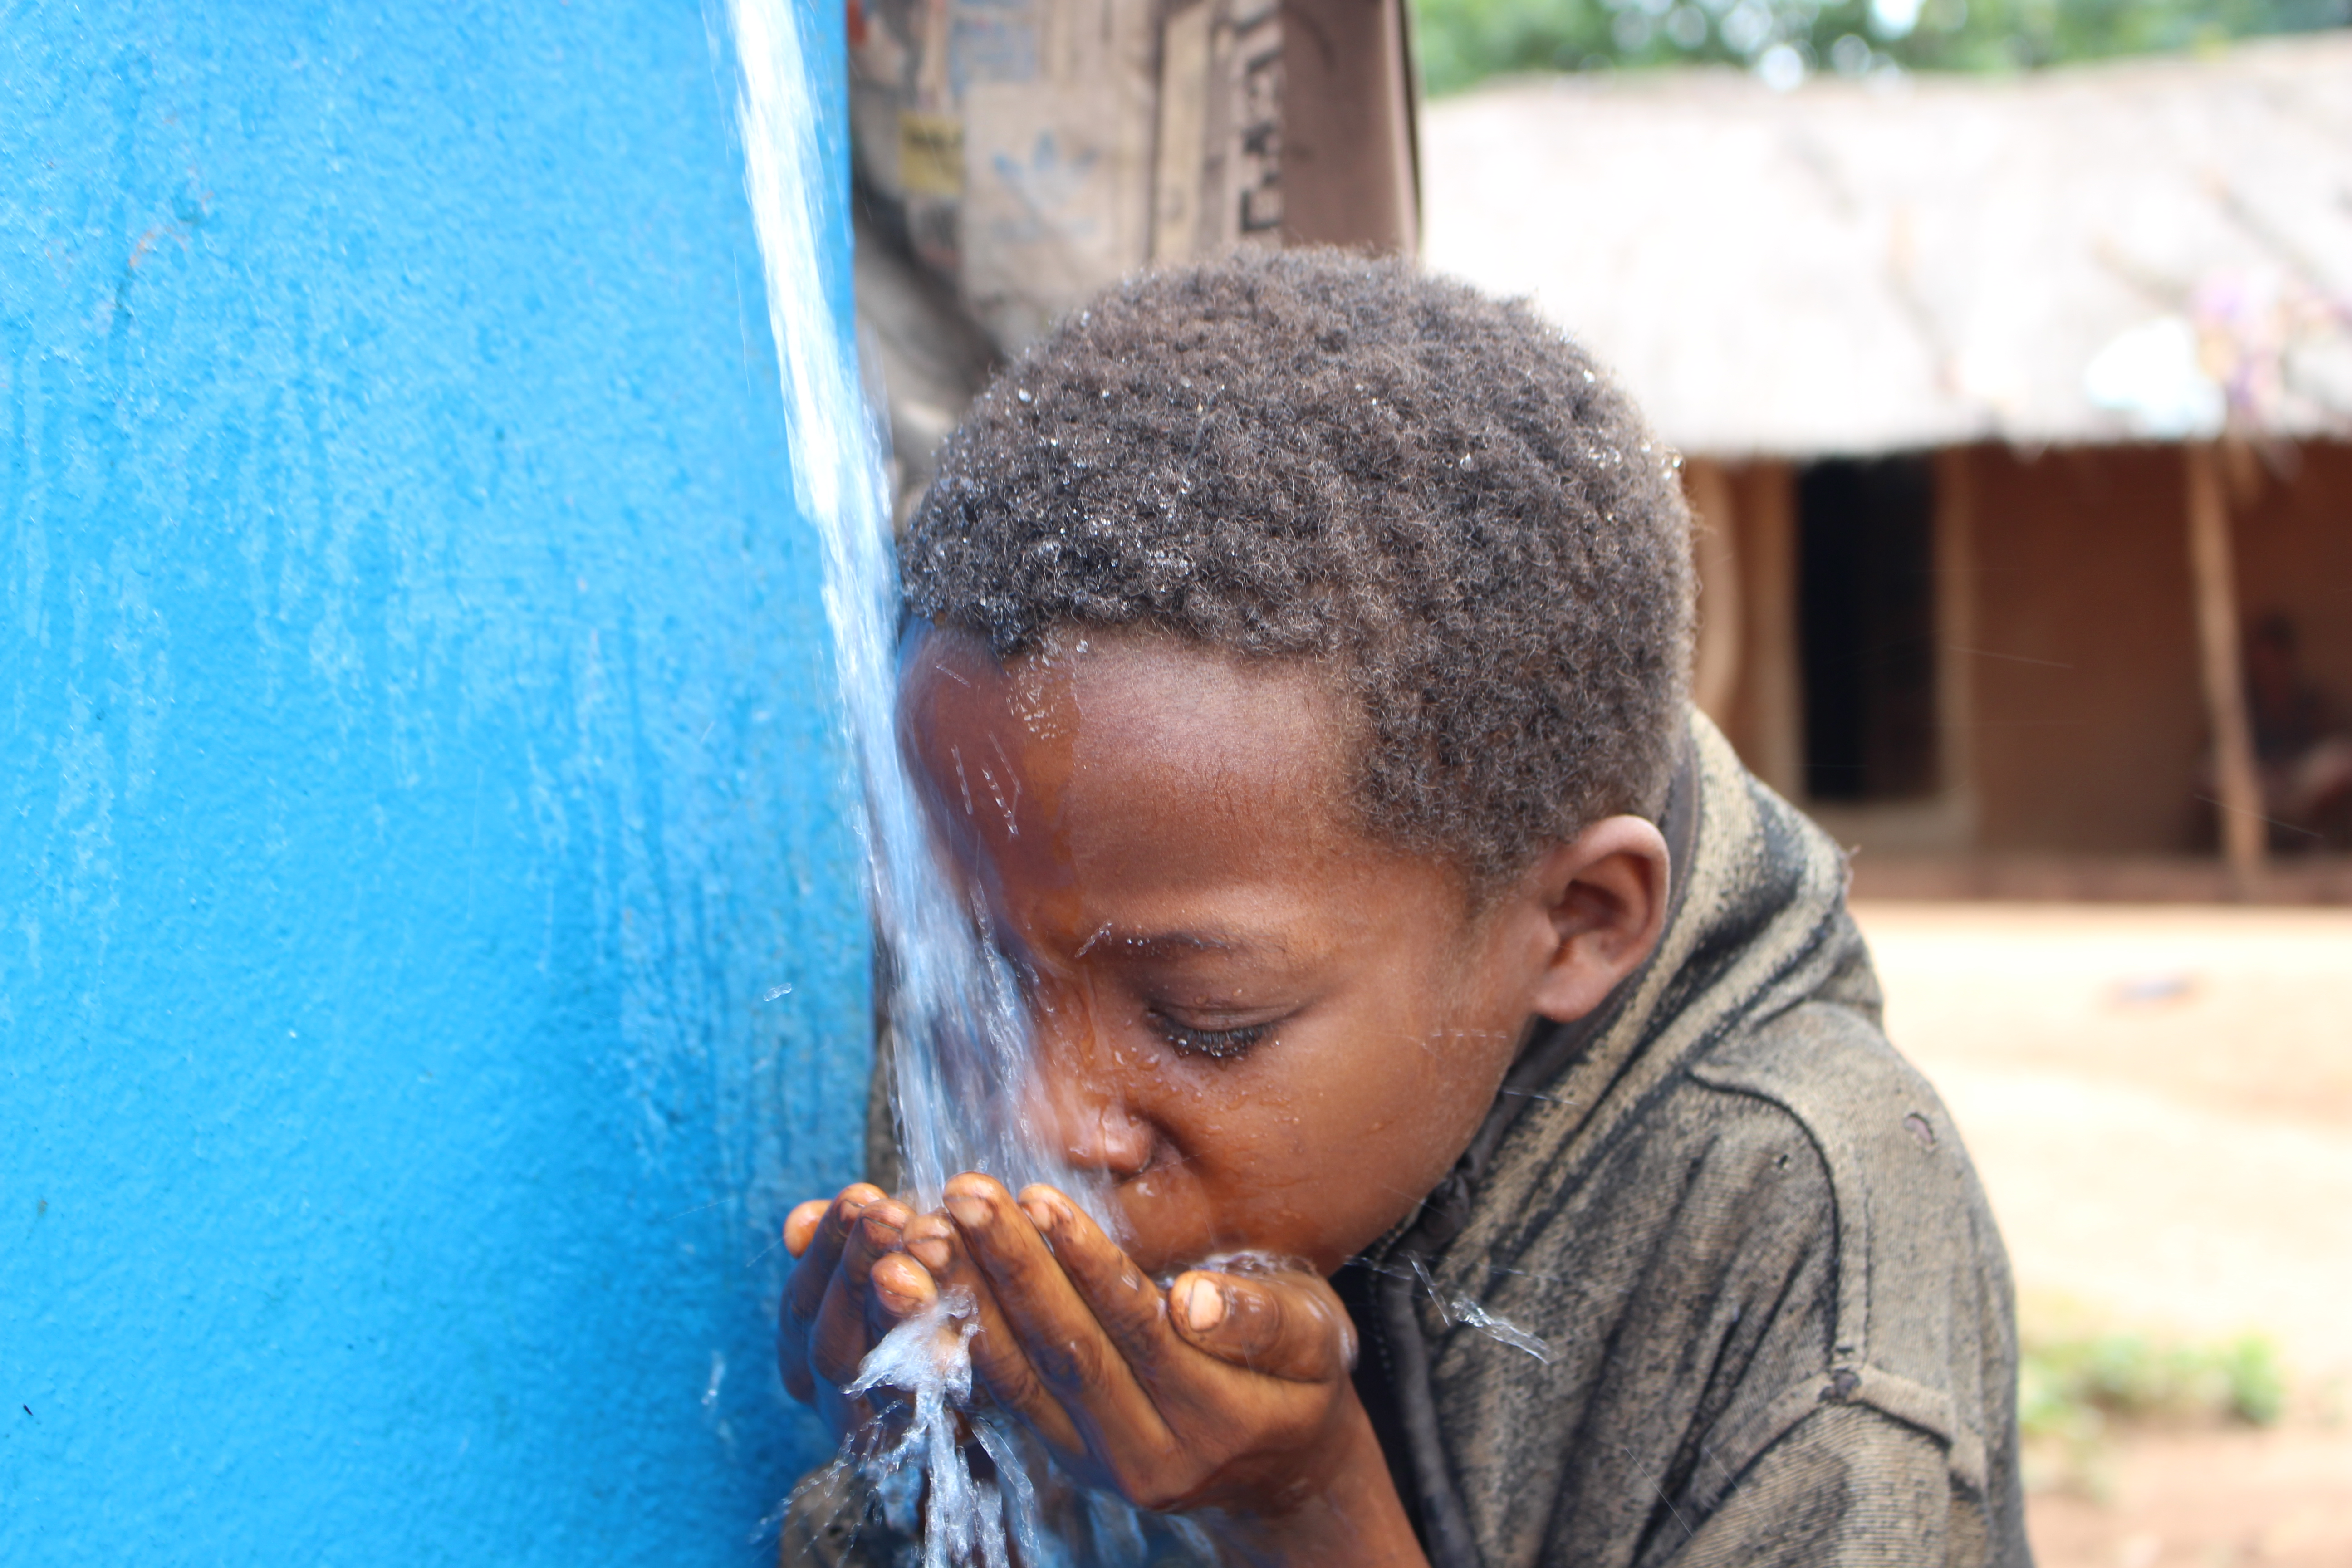 A young boy drinks water from an outdoor clean water tap